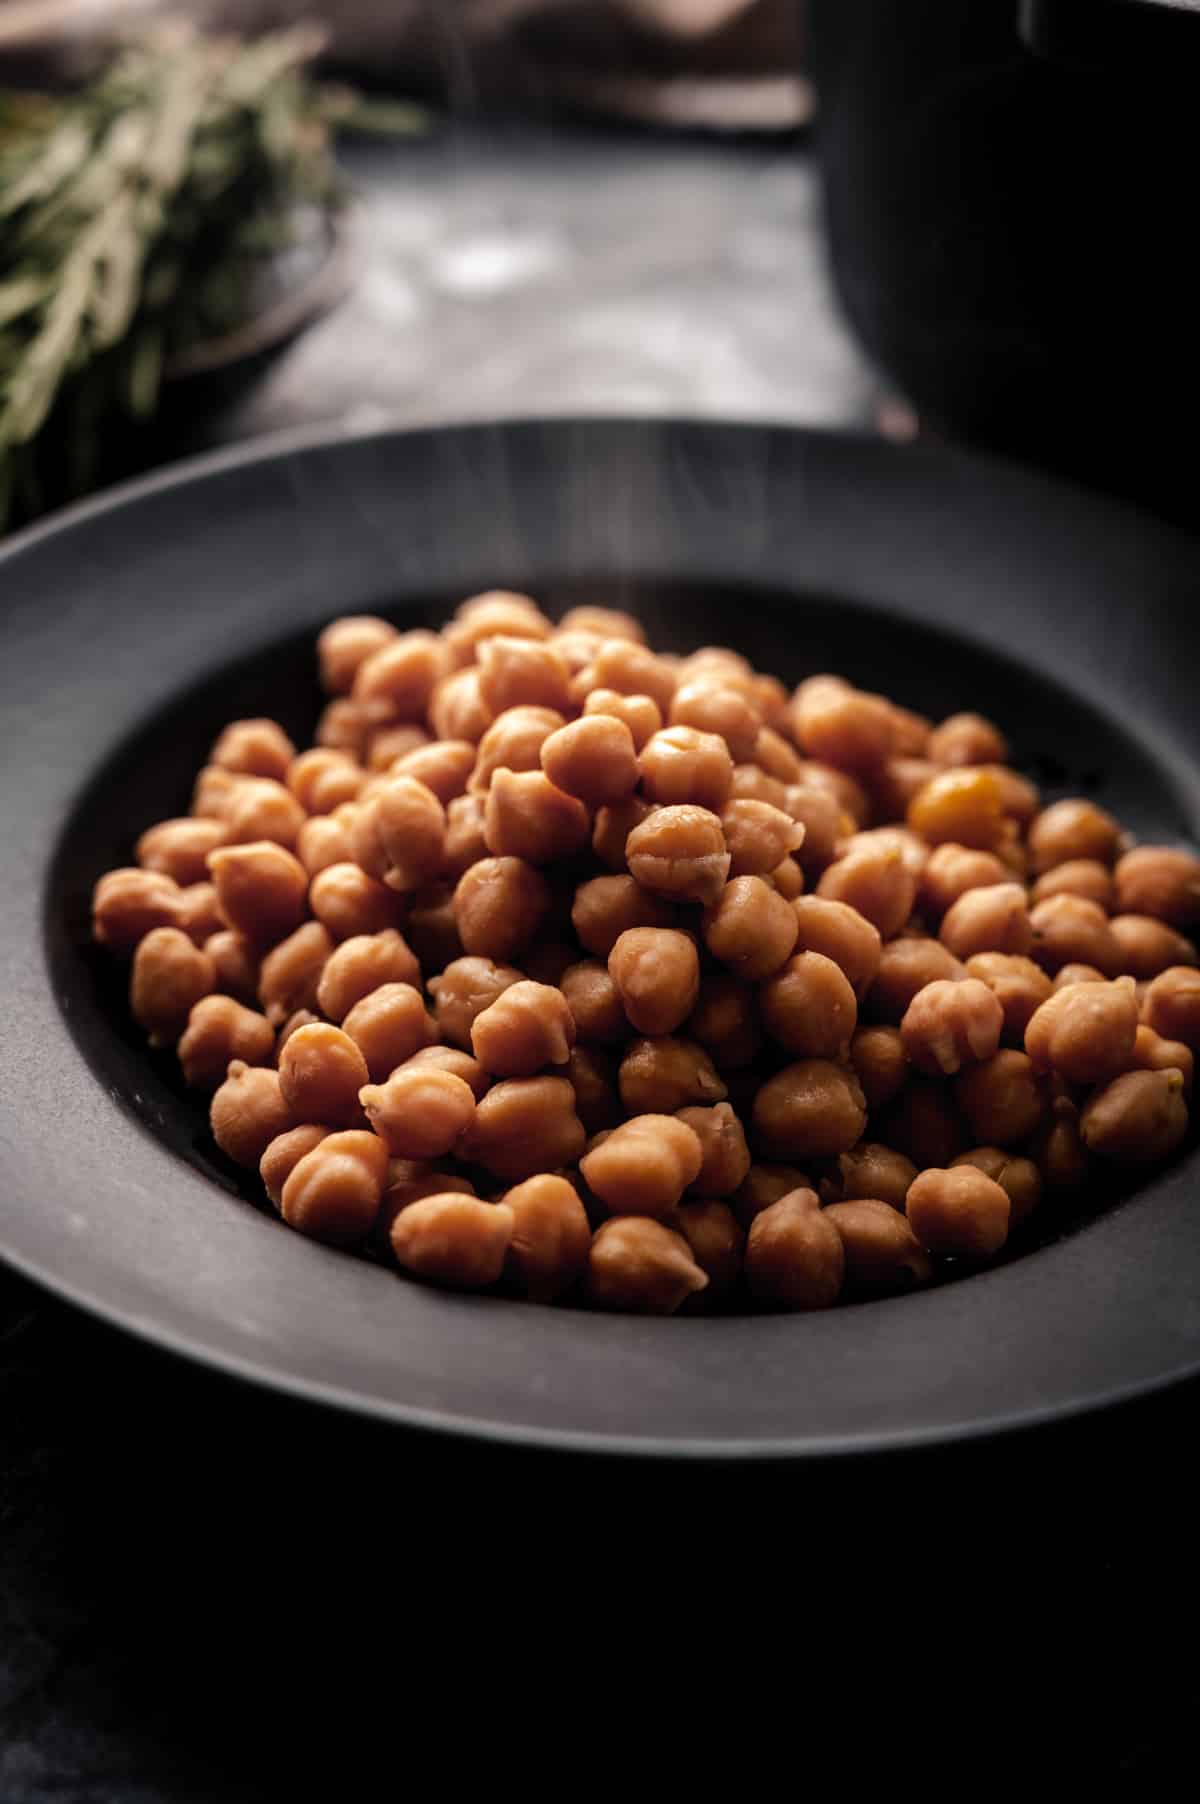 Angle shot of freshly cooked chickpeas with the cooking pot behind it.